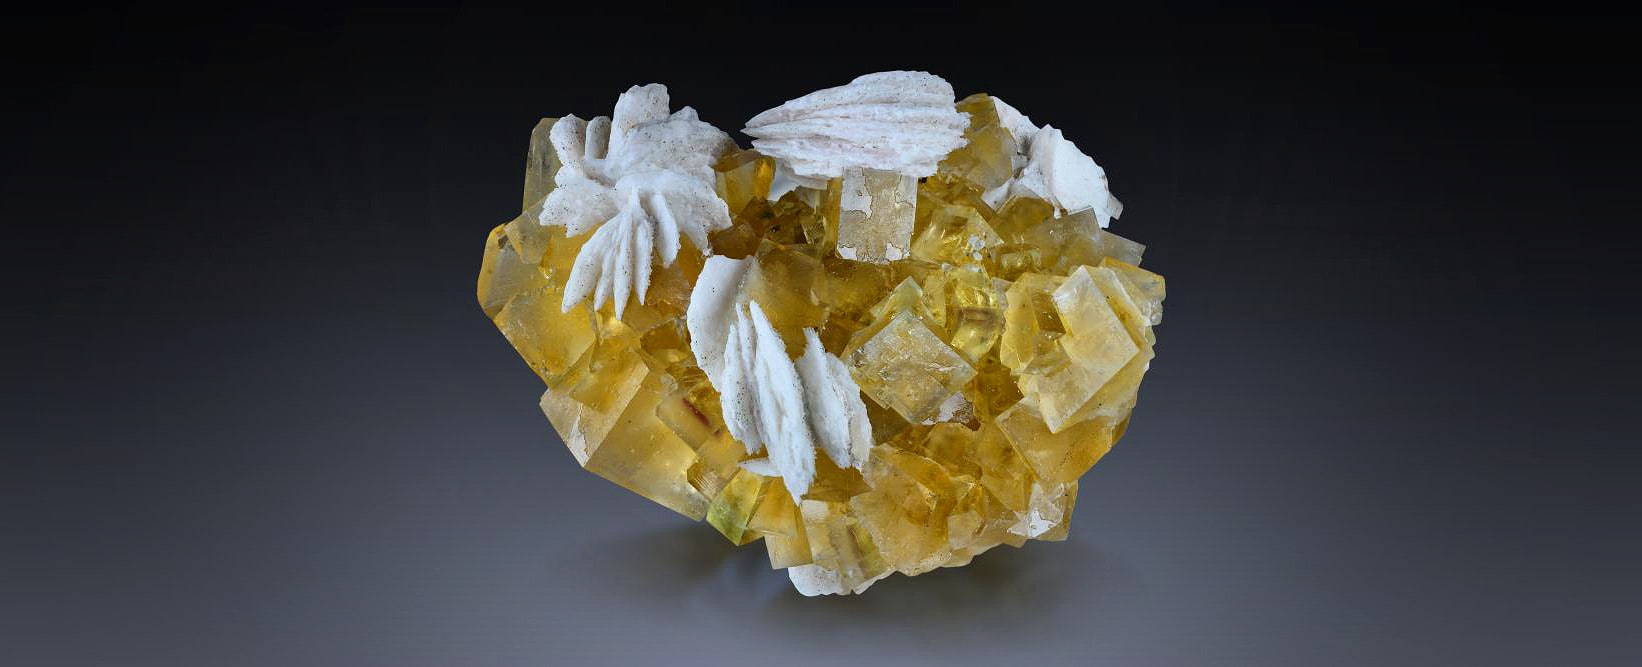 Barite Meaning and Properties 1